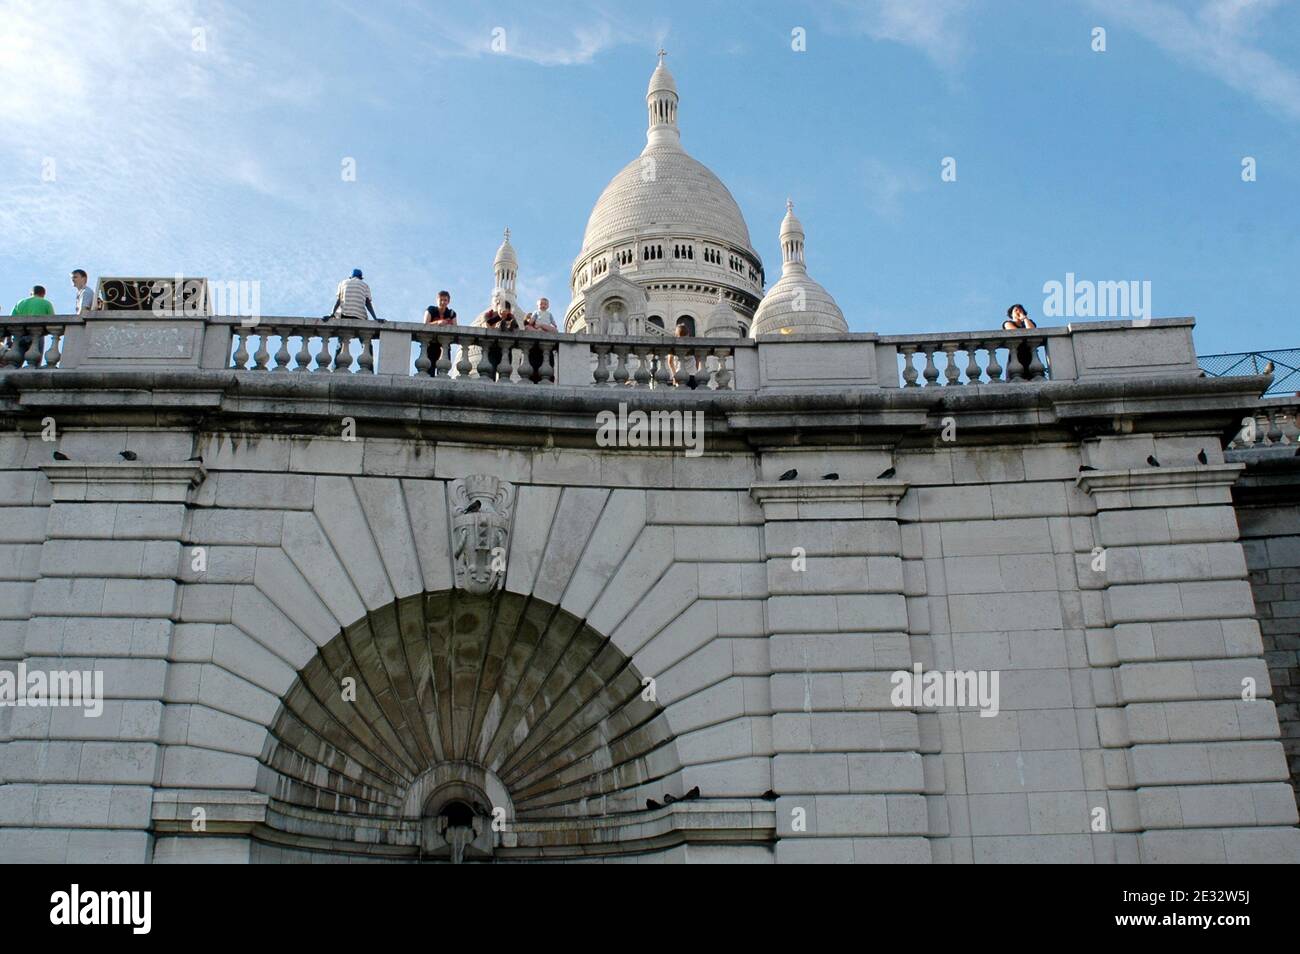 'Illustrations of the white-domed Basilica of the Sacre Coeur in the Montmartre quarter, 18th district of Paris, France, on July 29, 2010. With its many artists setting up their easels each day for the tourists. The Basilica of the Sacre Coeur was built on Montmartre from 1876 to 1912 by public subscription as a gesture of expiation of the ''crimes of the communards'', after the Paris Commune events, and to honour the French victims of the 1871 Franco-Prussian War. Its white dome is a highly visible landmark in the city. Photo by Alain Apaydin/ABACAPRESS.COM' Stock Photo